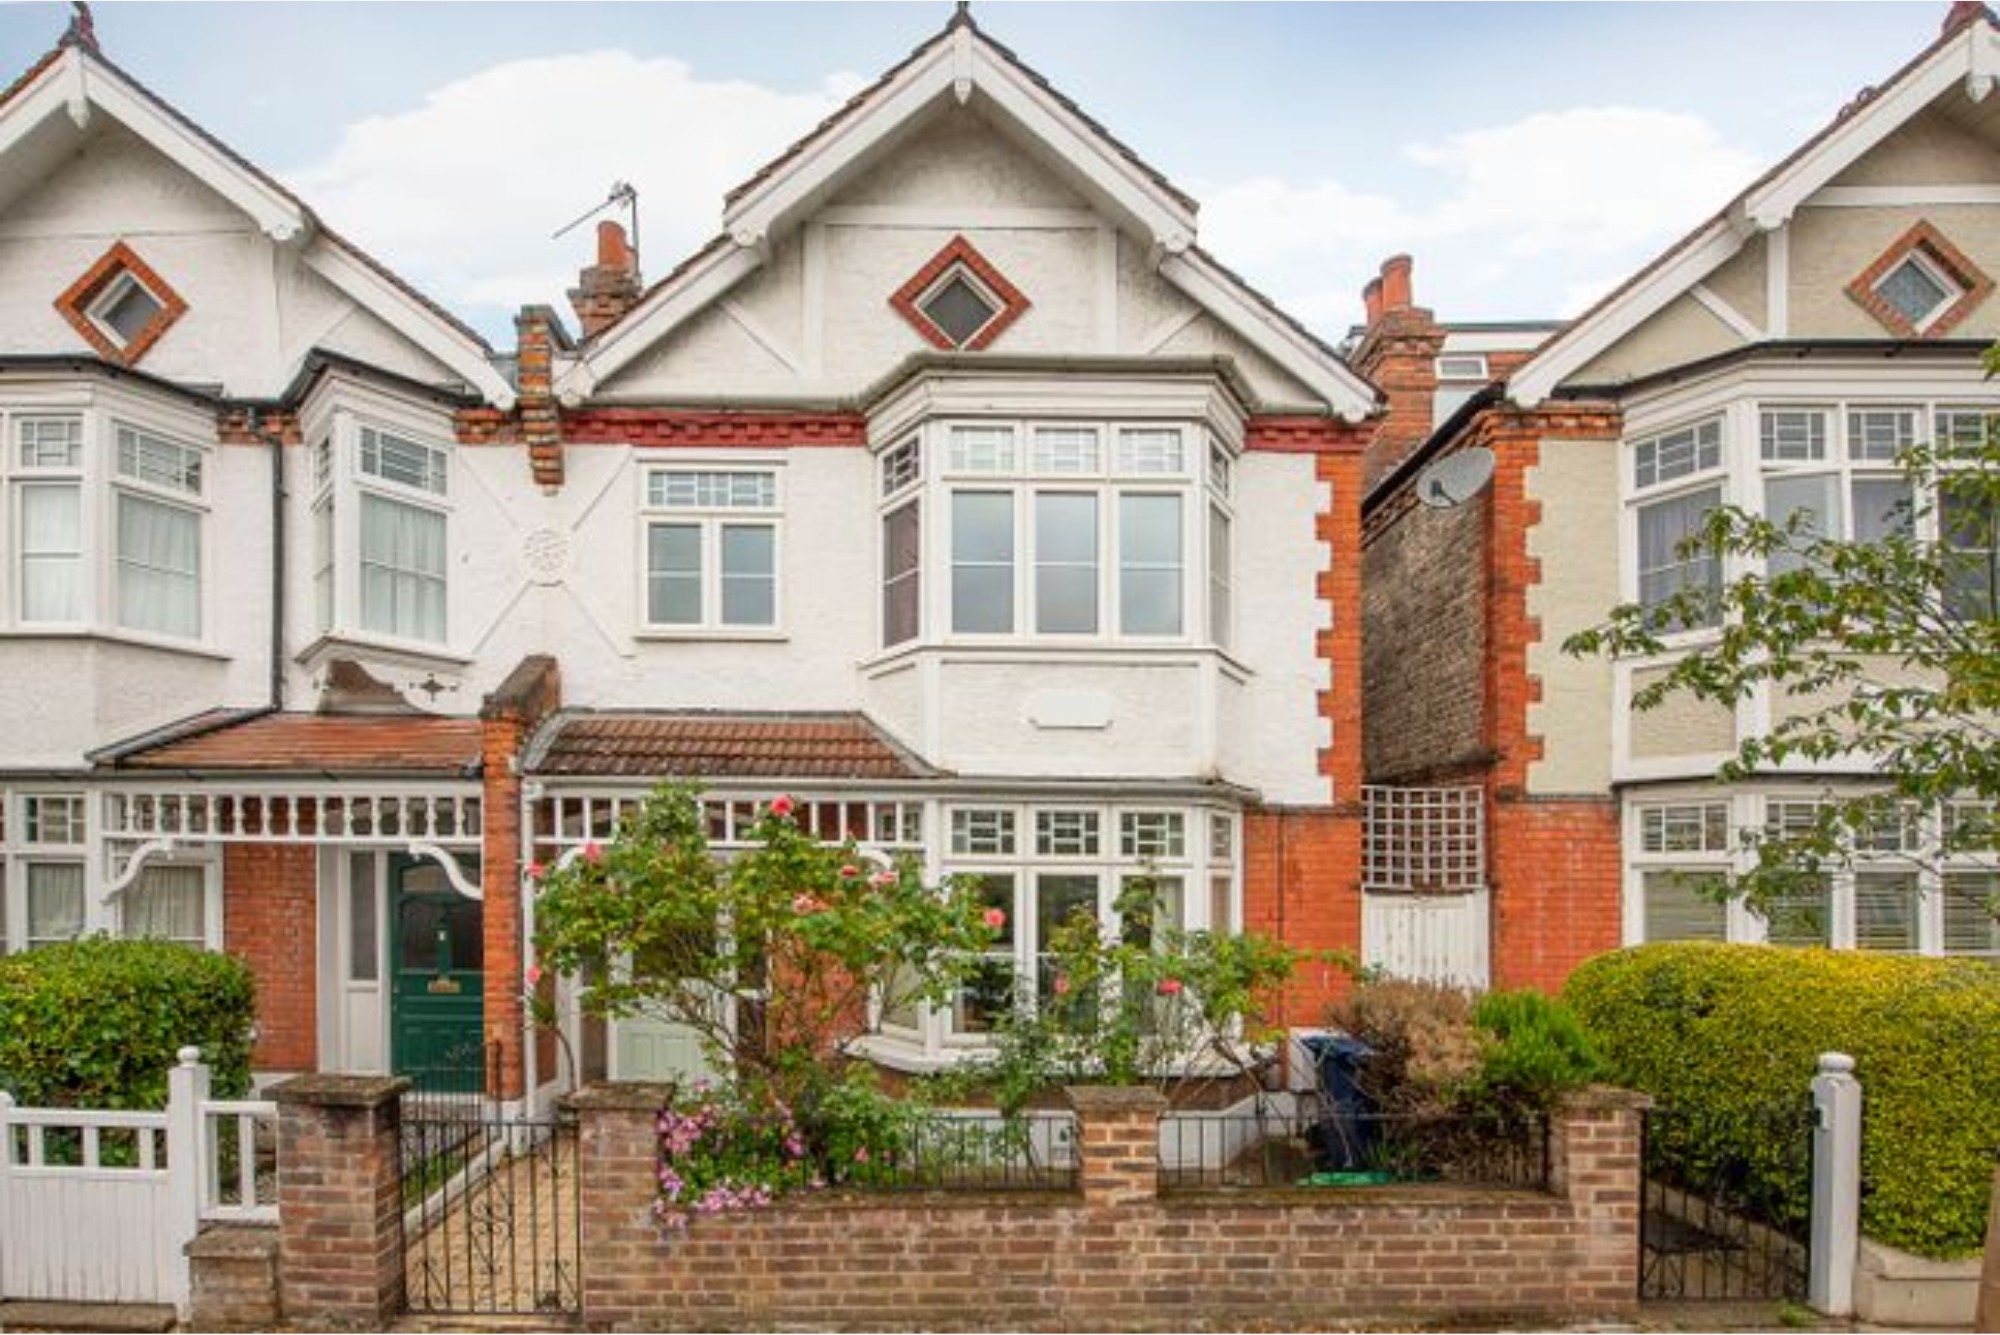 chiswick real estate for sale